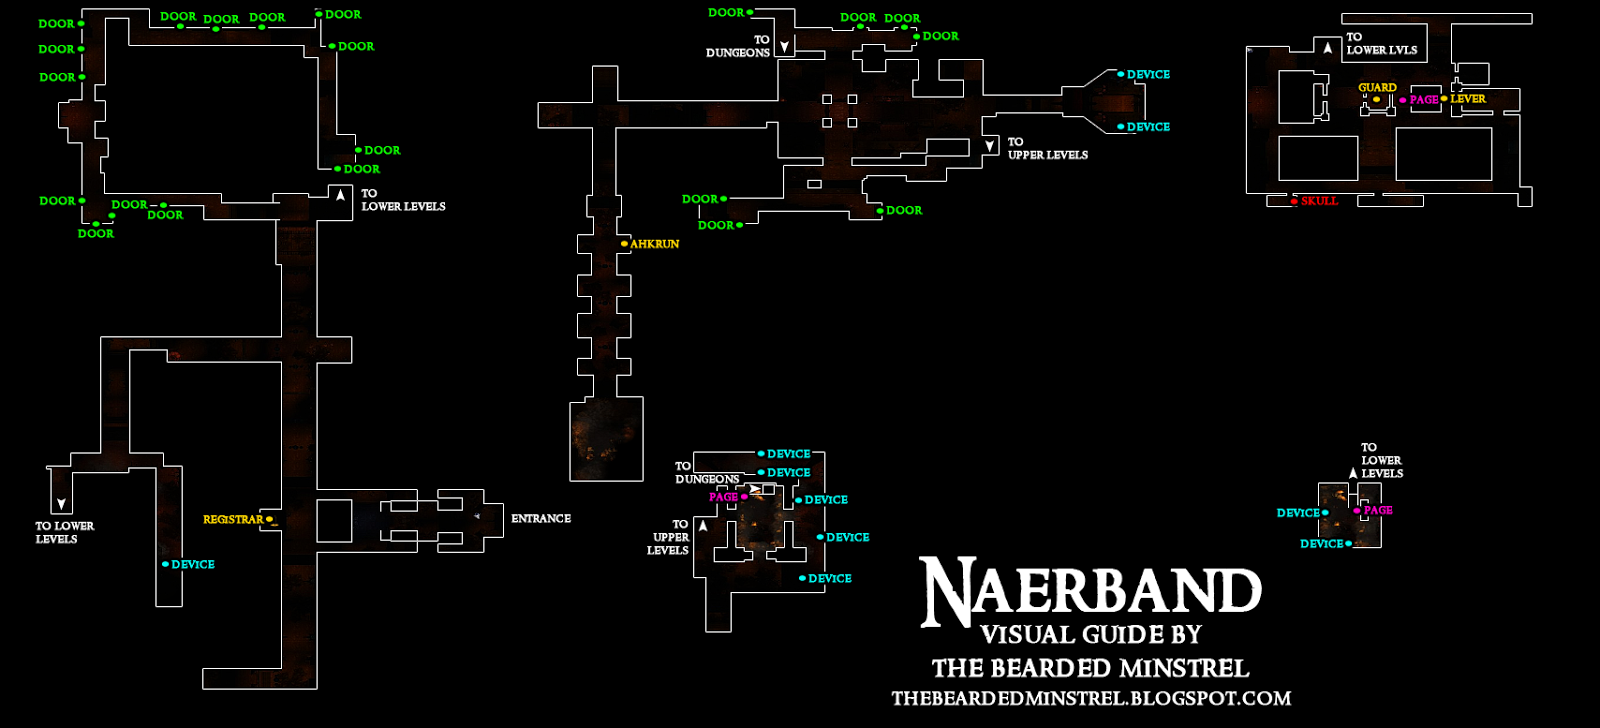 Naerband guide.png